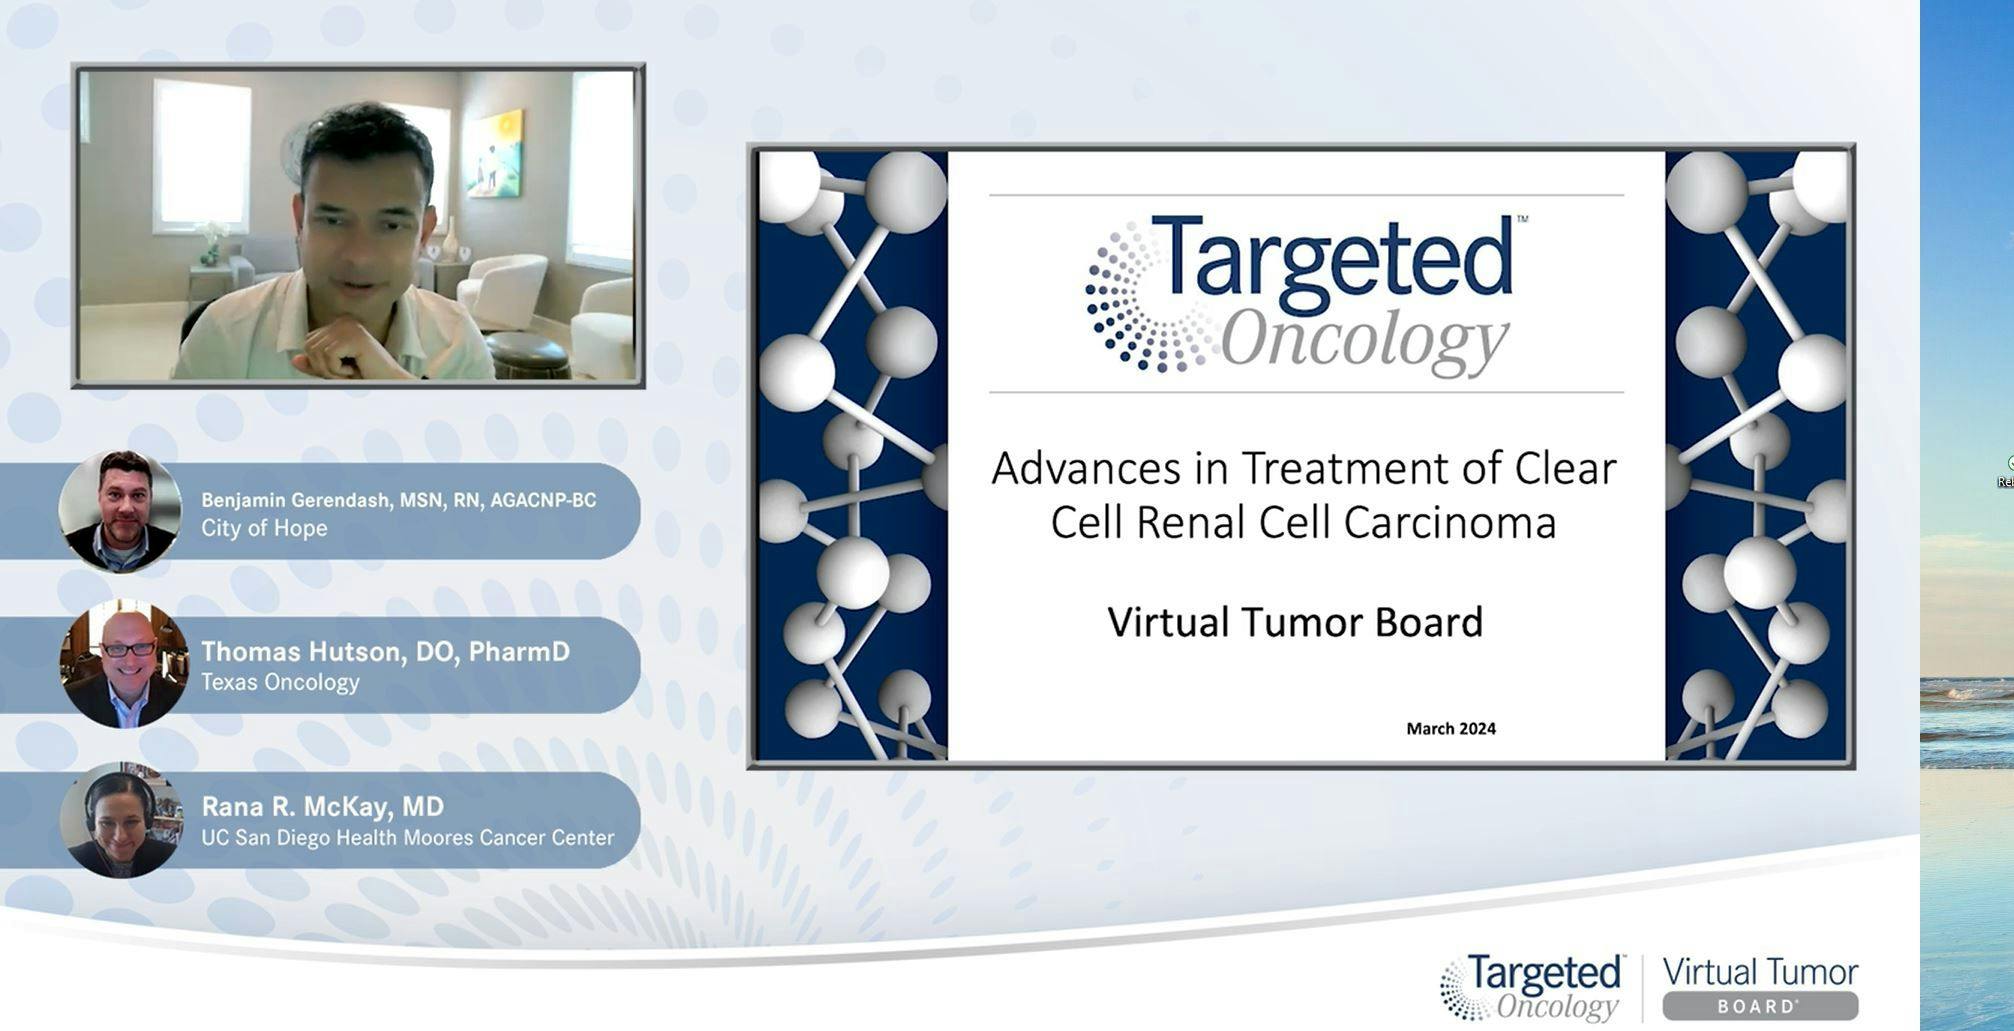 Video 10 - "RCC: Informing Treatment Decisions with Clinical Trial Data"